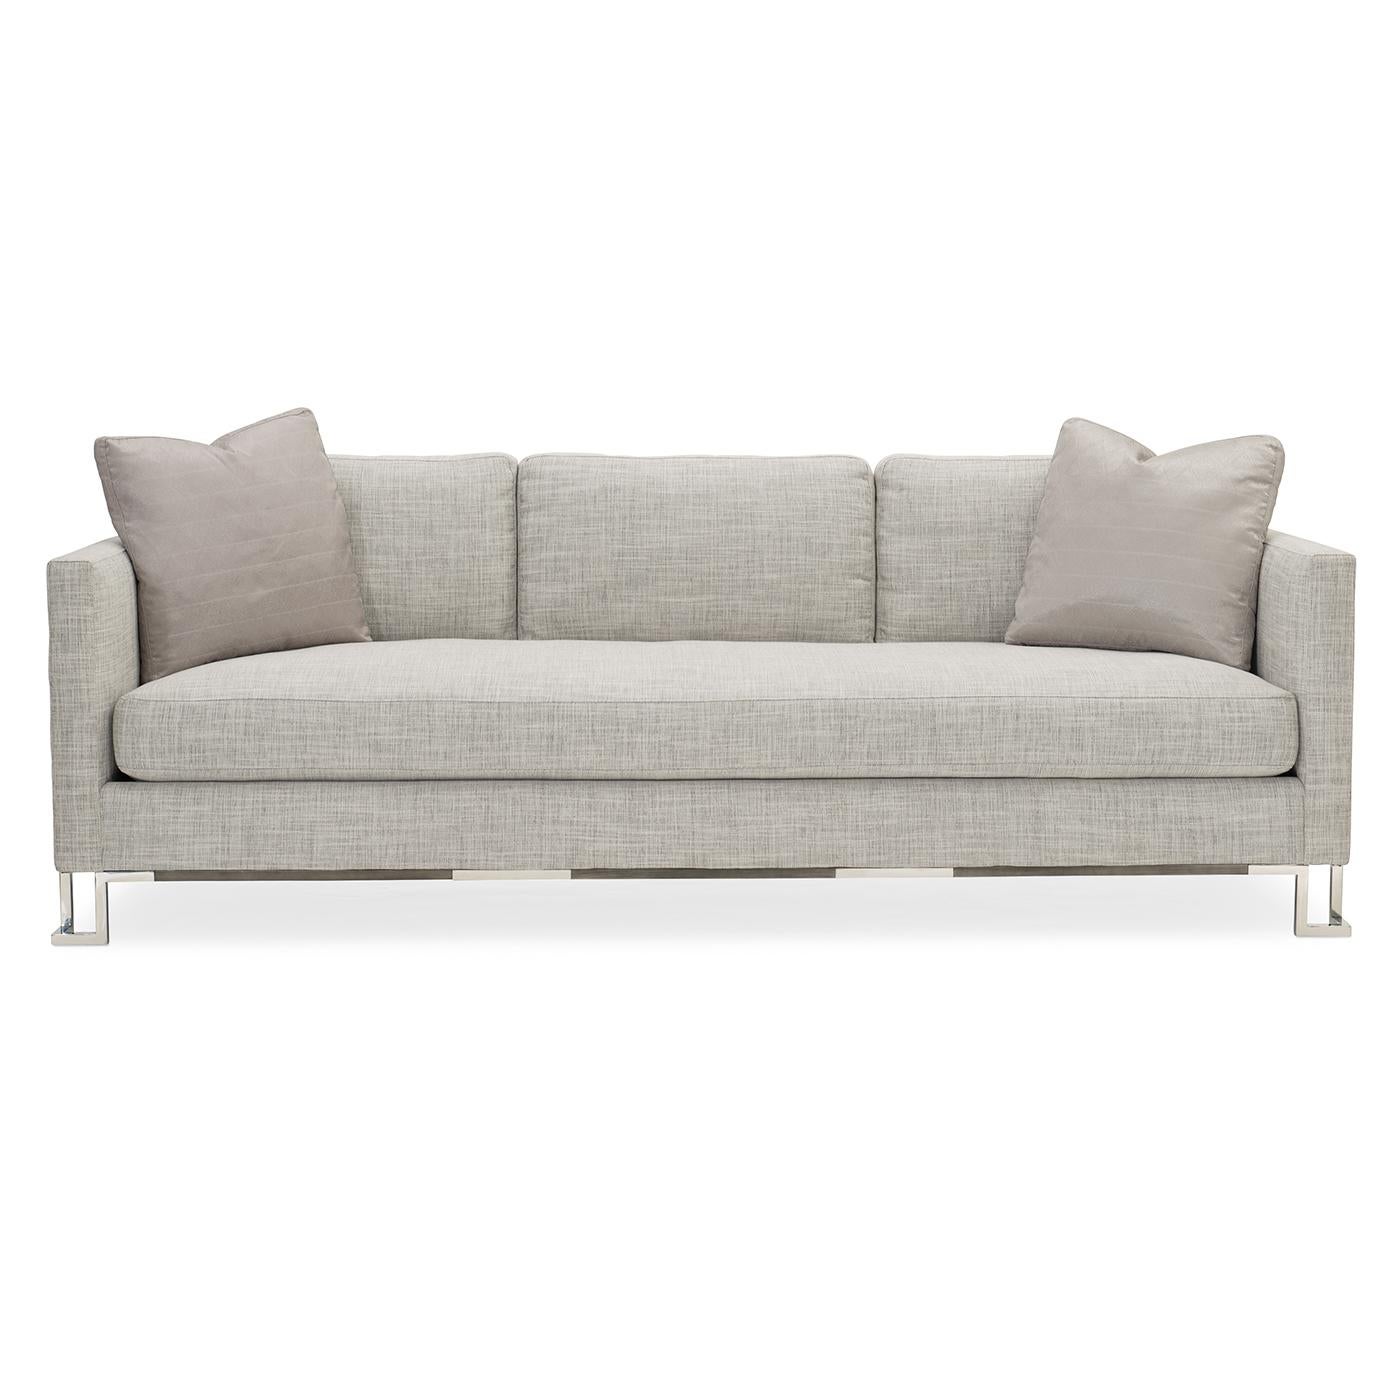 A definitive tastemaker, this exceptional sofa has all the right stuff. Its simple silhouette is accentuated by a stainless-steel and tungsten-plated frame with a two-tone finish. This innovative design gives the sofa a suspended look and creates a